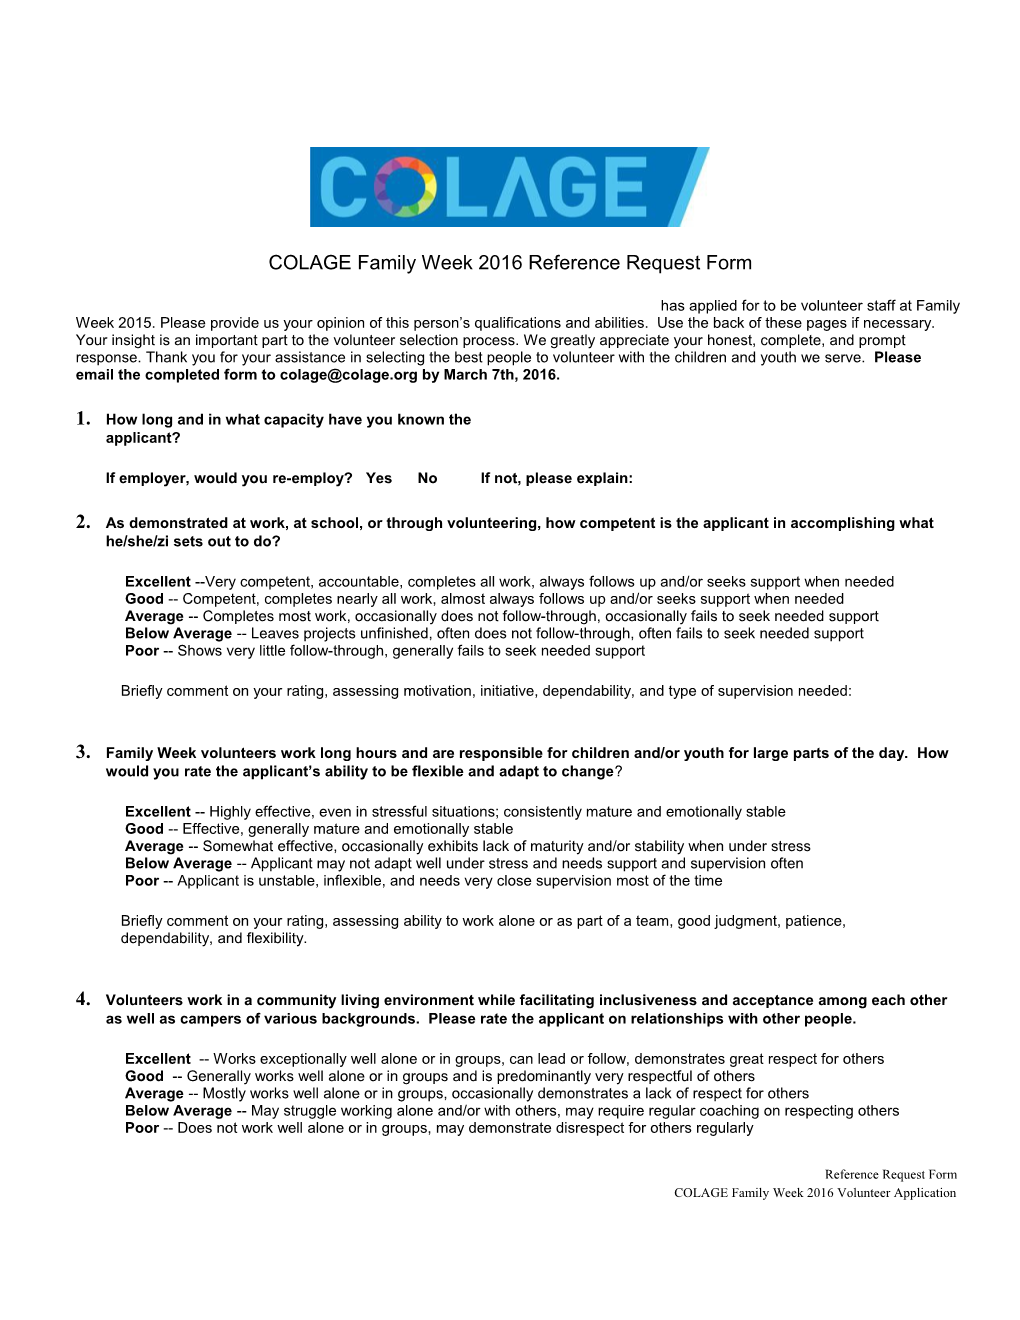 COLAGE Family Week 2016 Reference Request Form